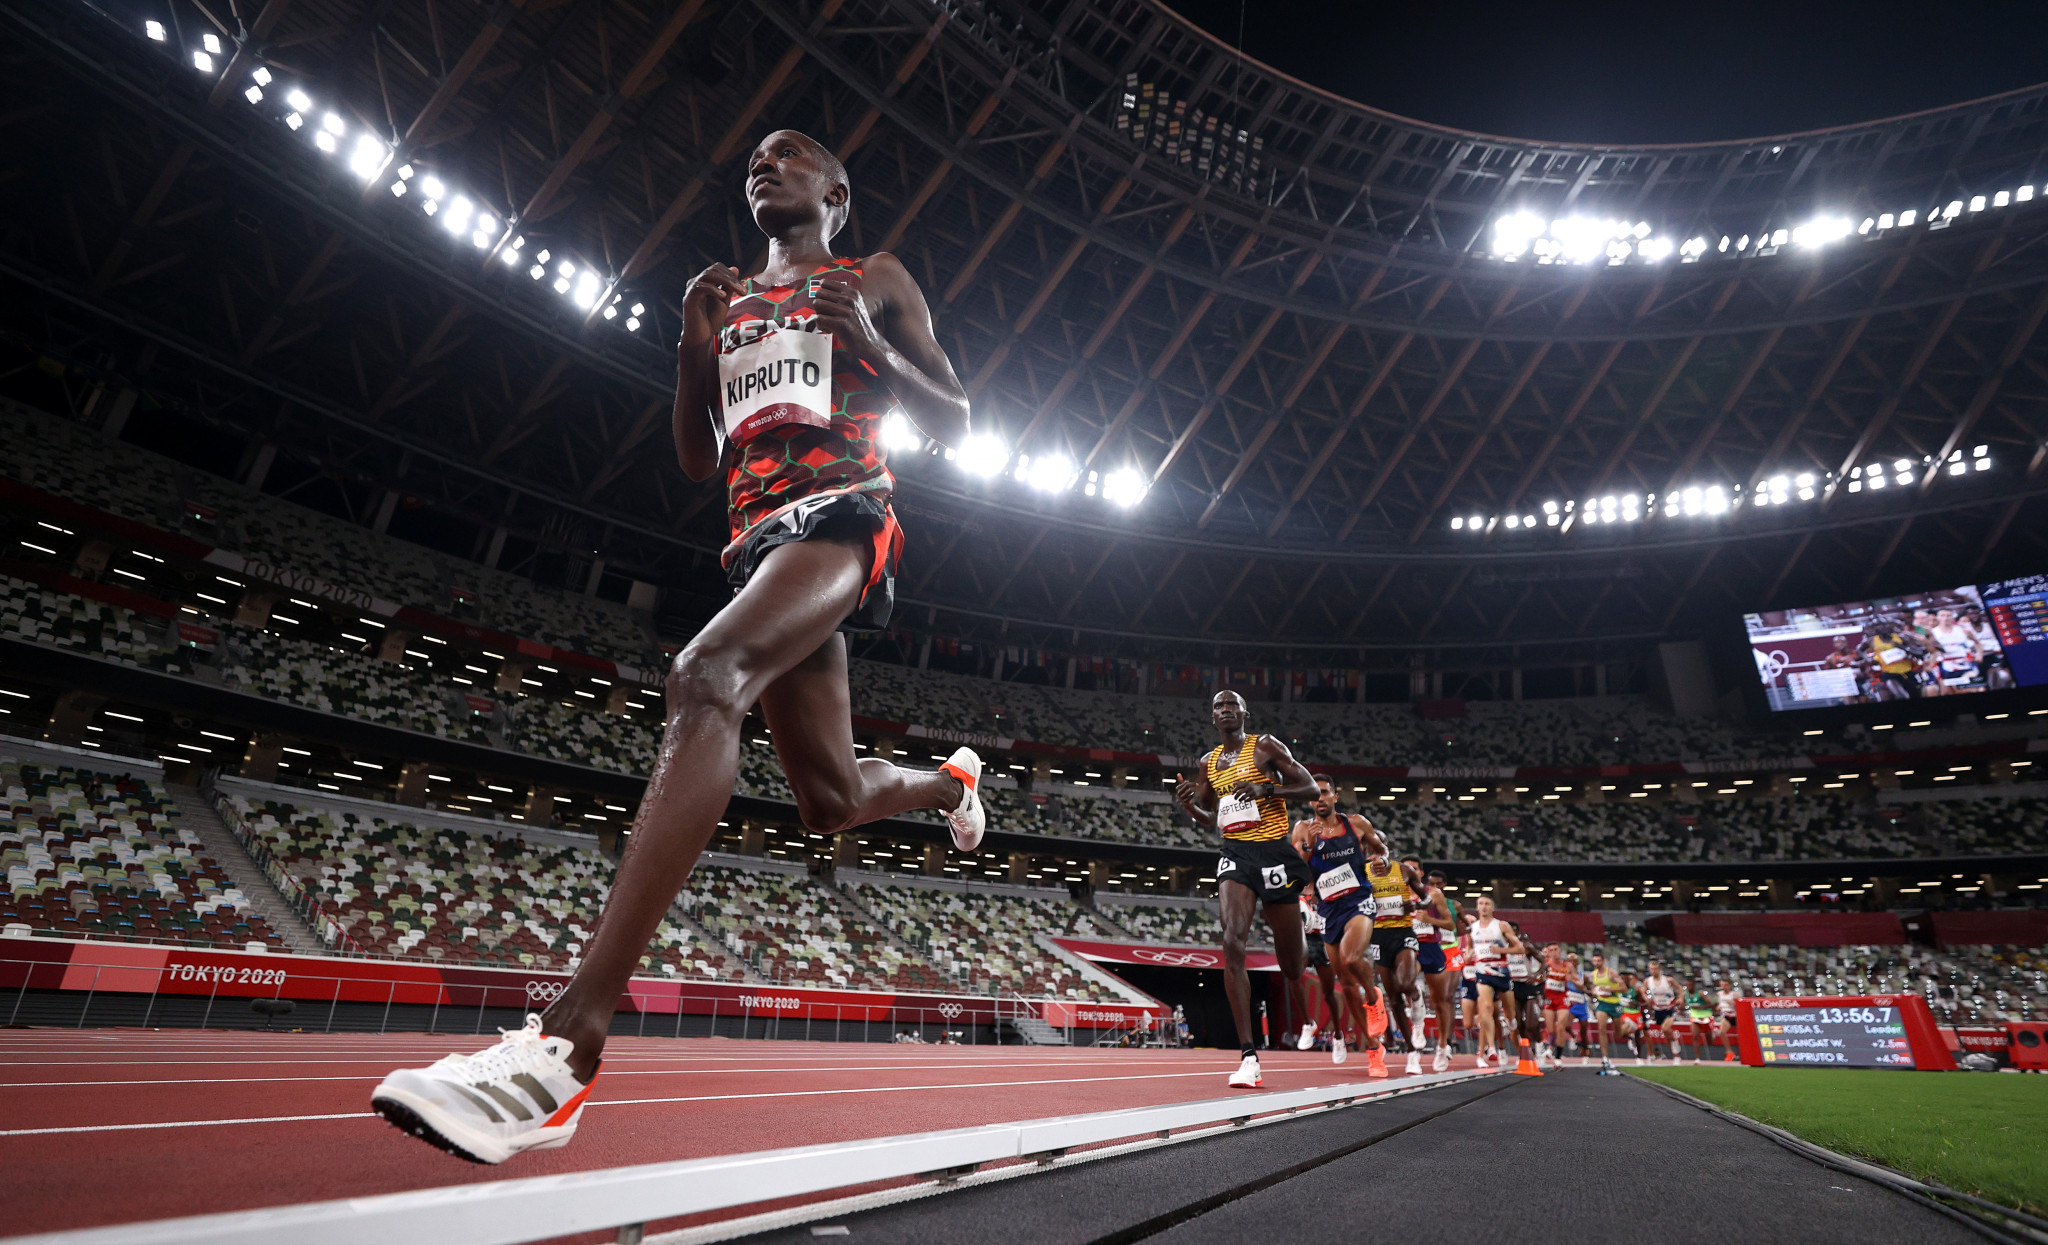 Rhonex Kipruto competes in the Men's 10,000m Final on day seven of the Tokyo 2020 Olympic Games. GETTY IMAGES